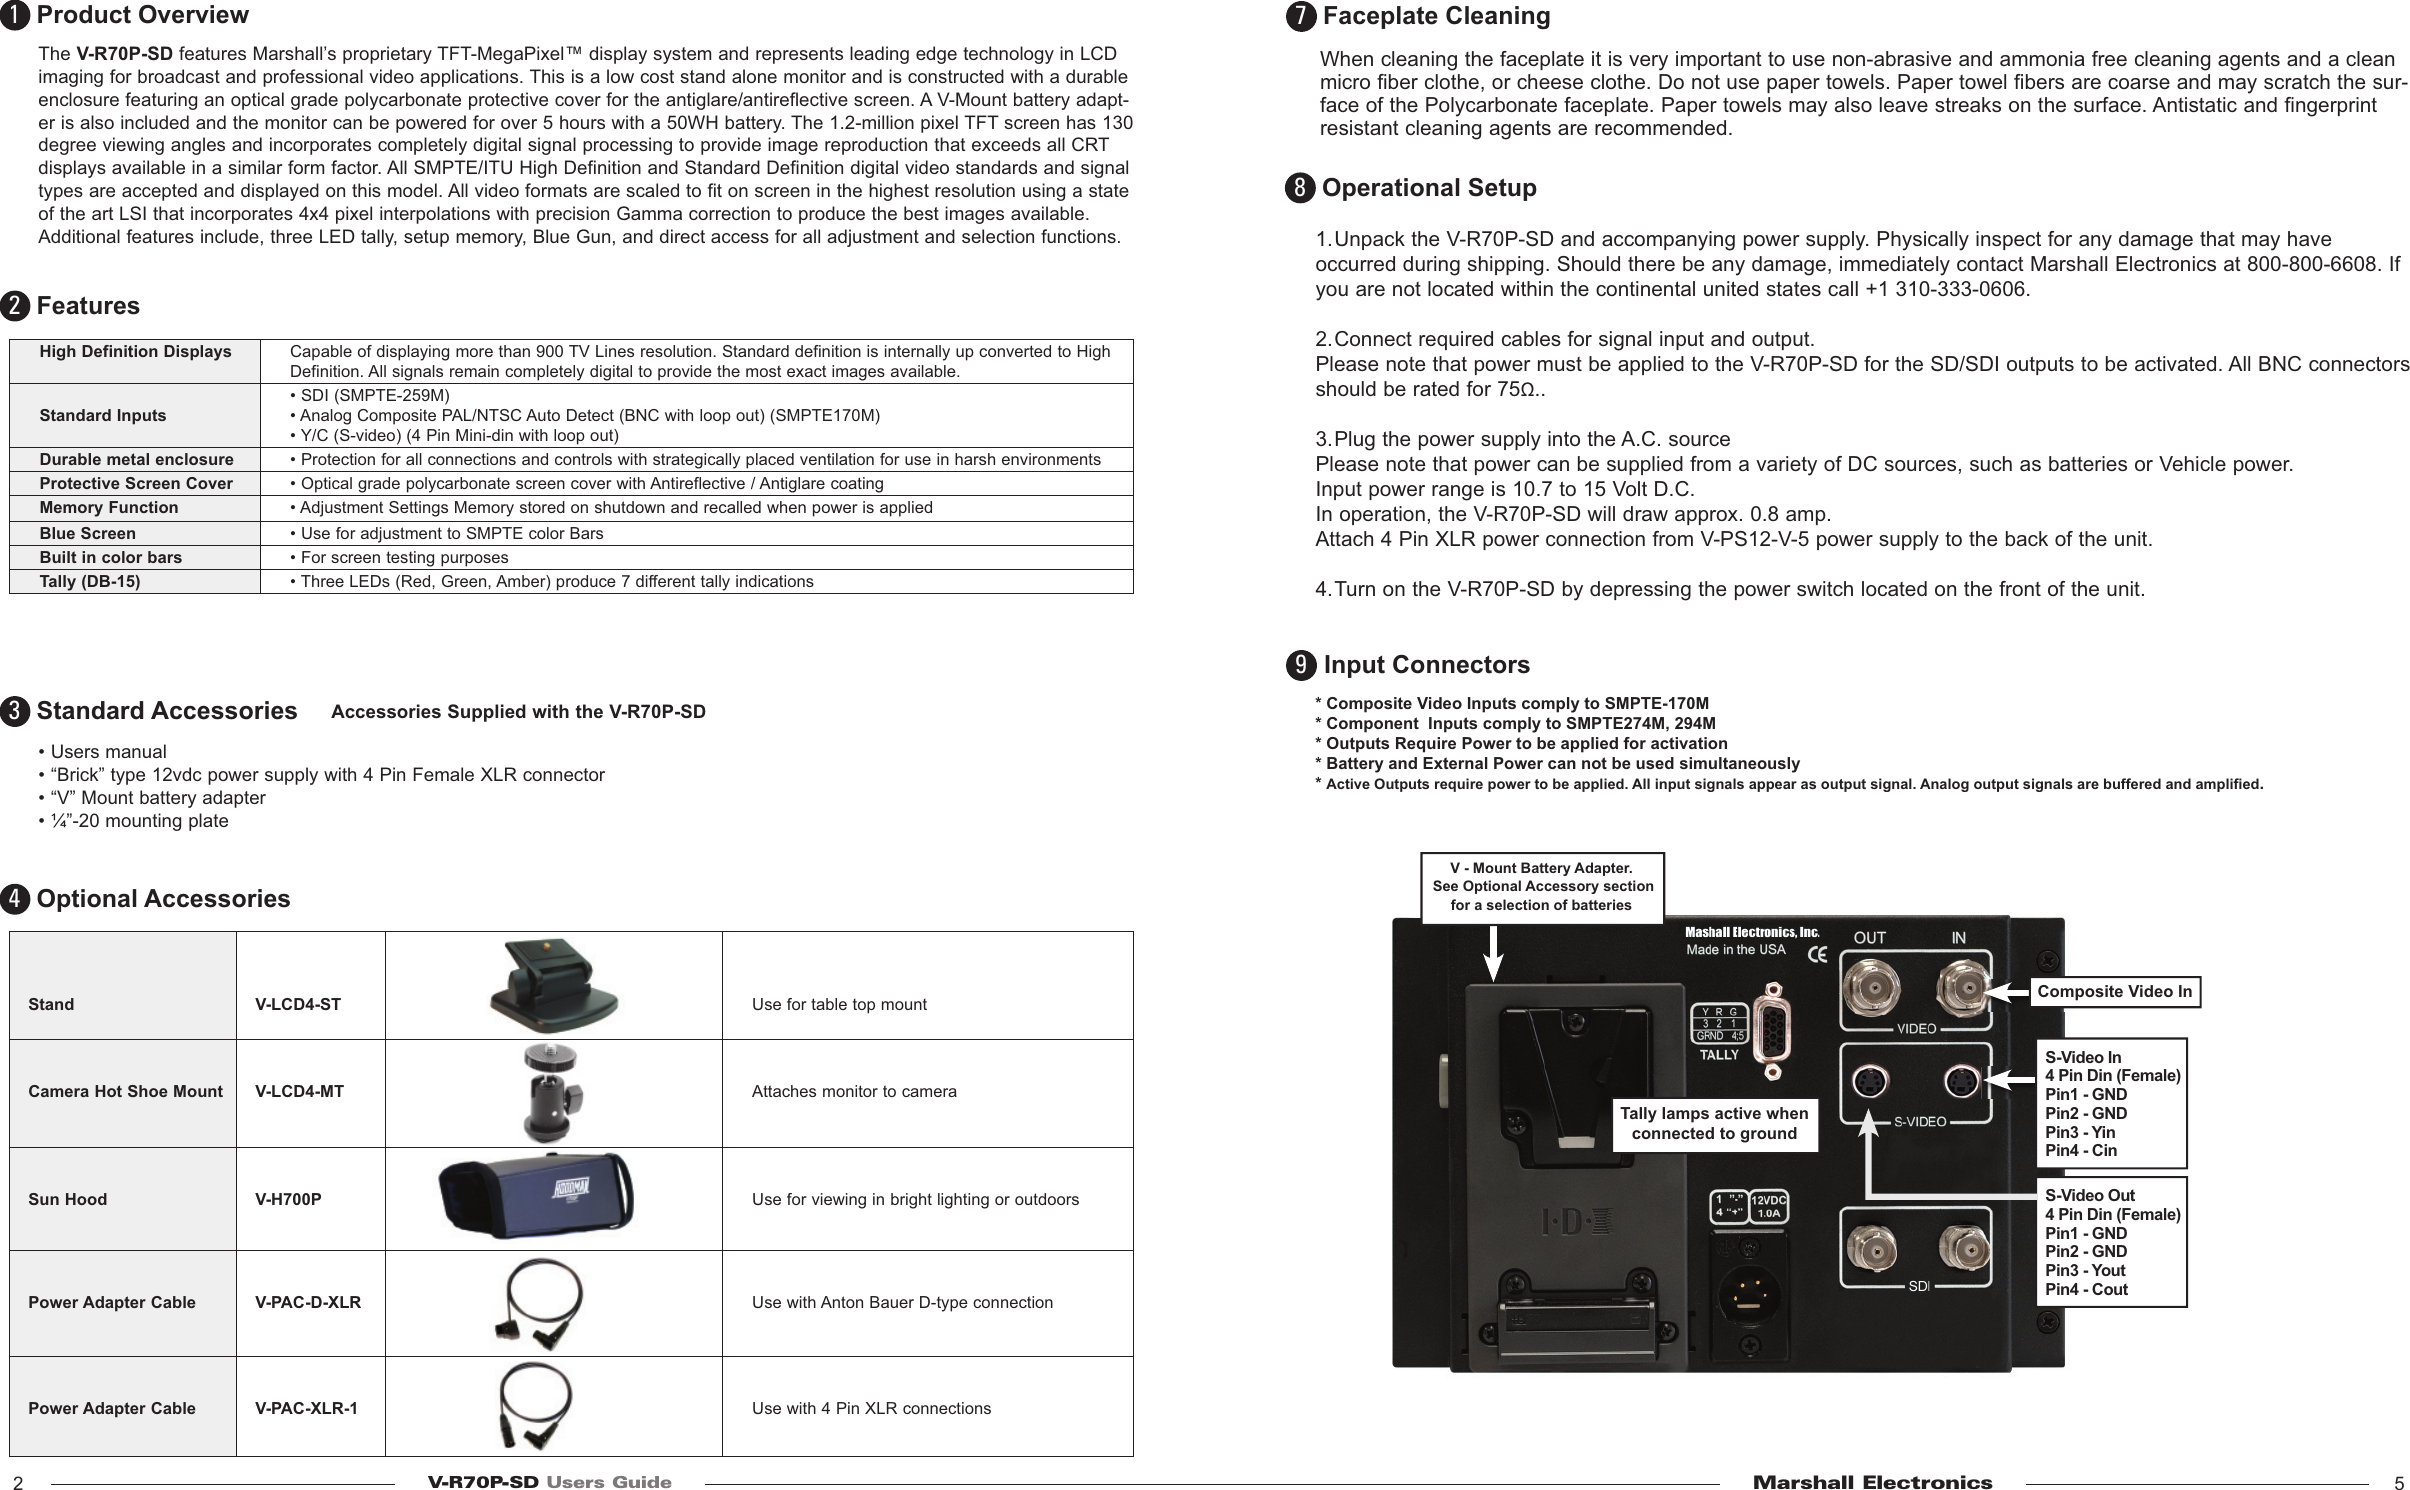 Page 3 of 6 - Marshall-Electronic Marshall-Electronic-Tft-Megapixel-Monitor-V-R70P-Sd-Users-Manual- V-R70P-SD Users Guide  Marshall-electronic-tft-megapixel-monitor-v-r70p-sd-users-manual